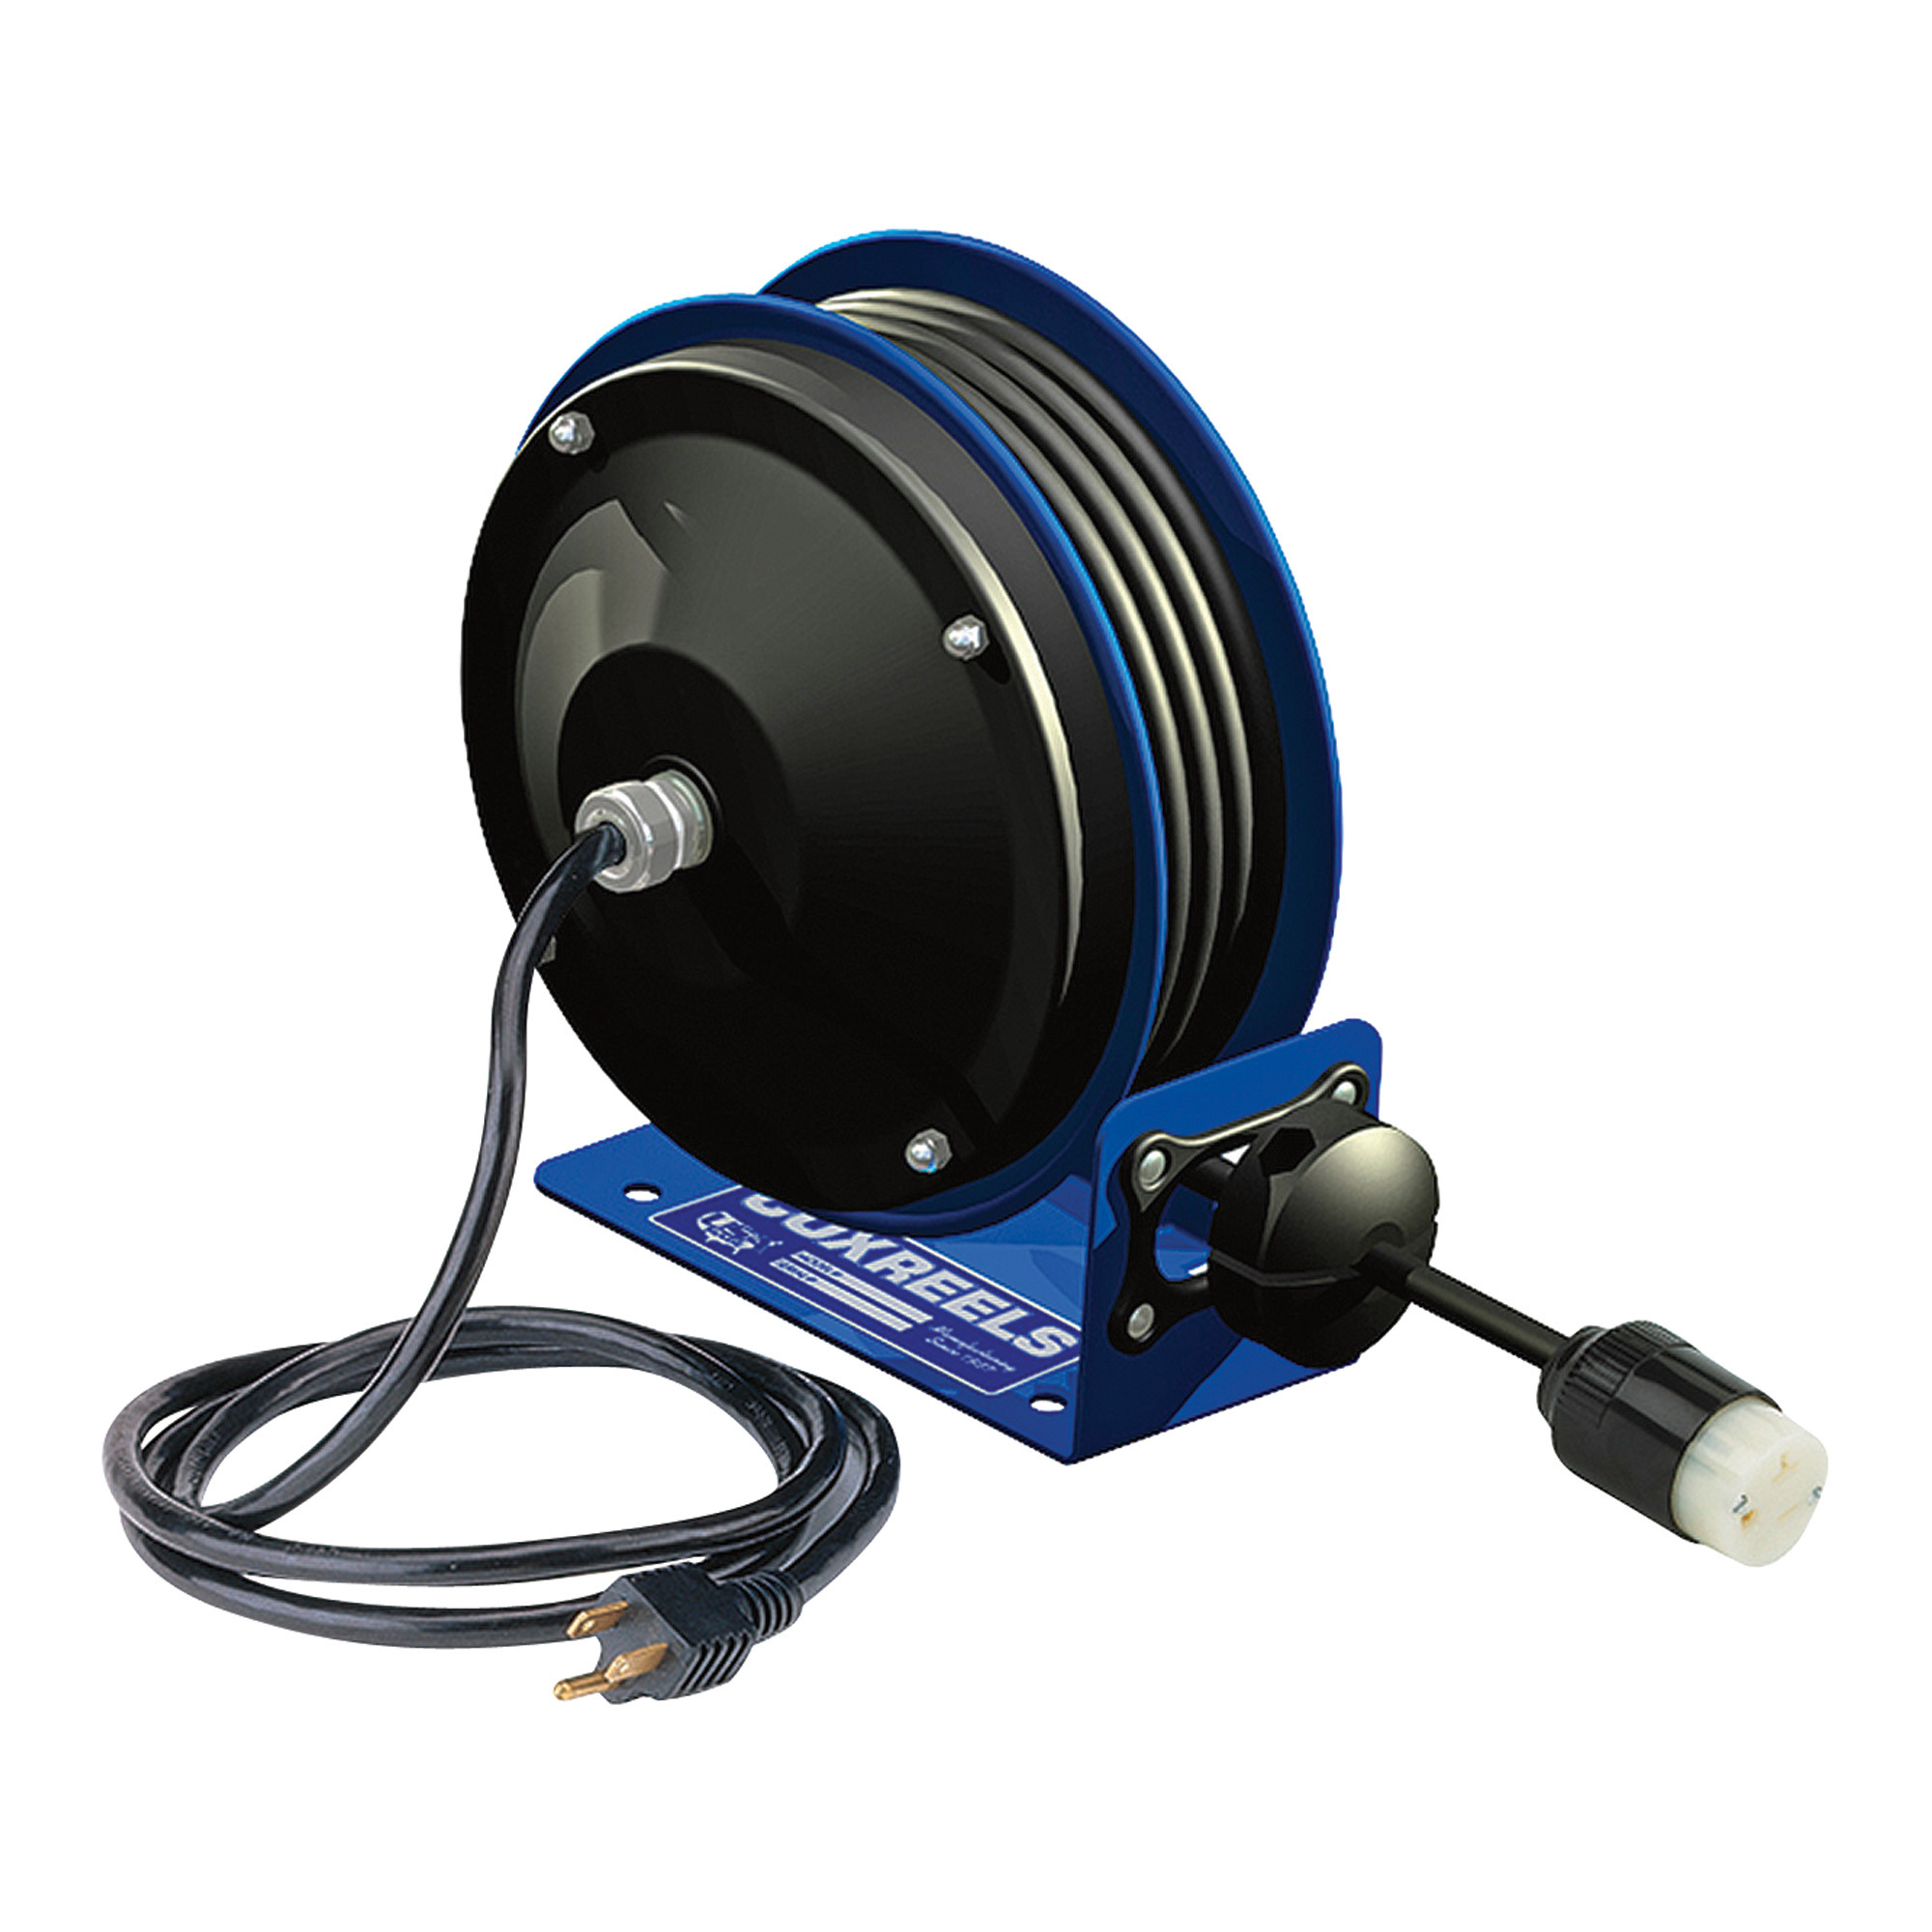 Coxreels Compact Power Cord Reel, 30-Ft., 16/3 Cord With Single